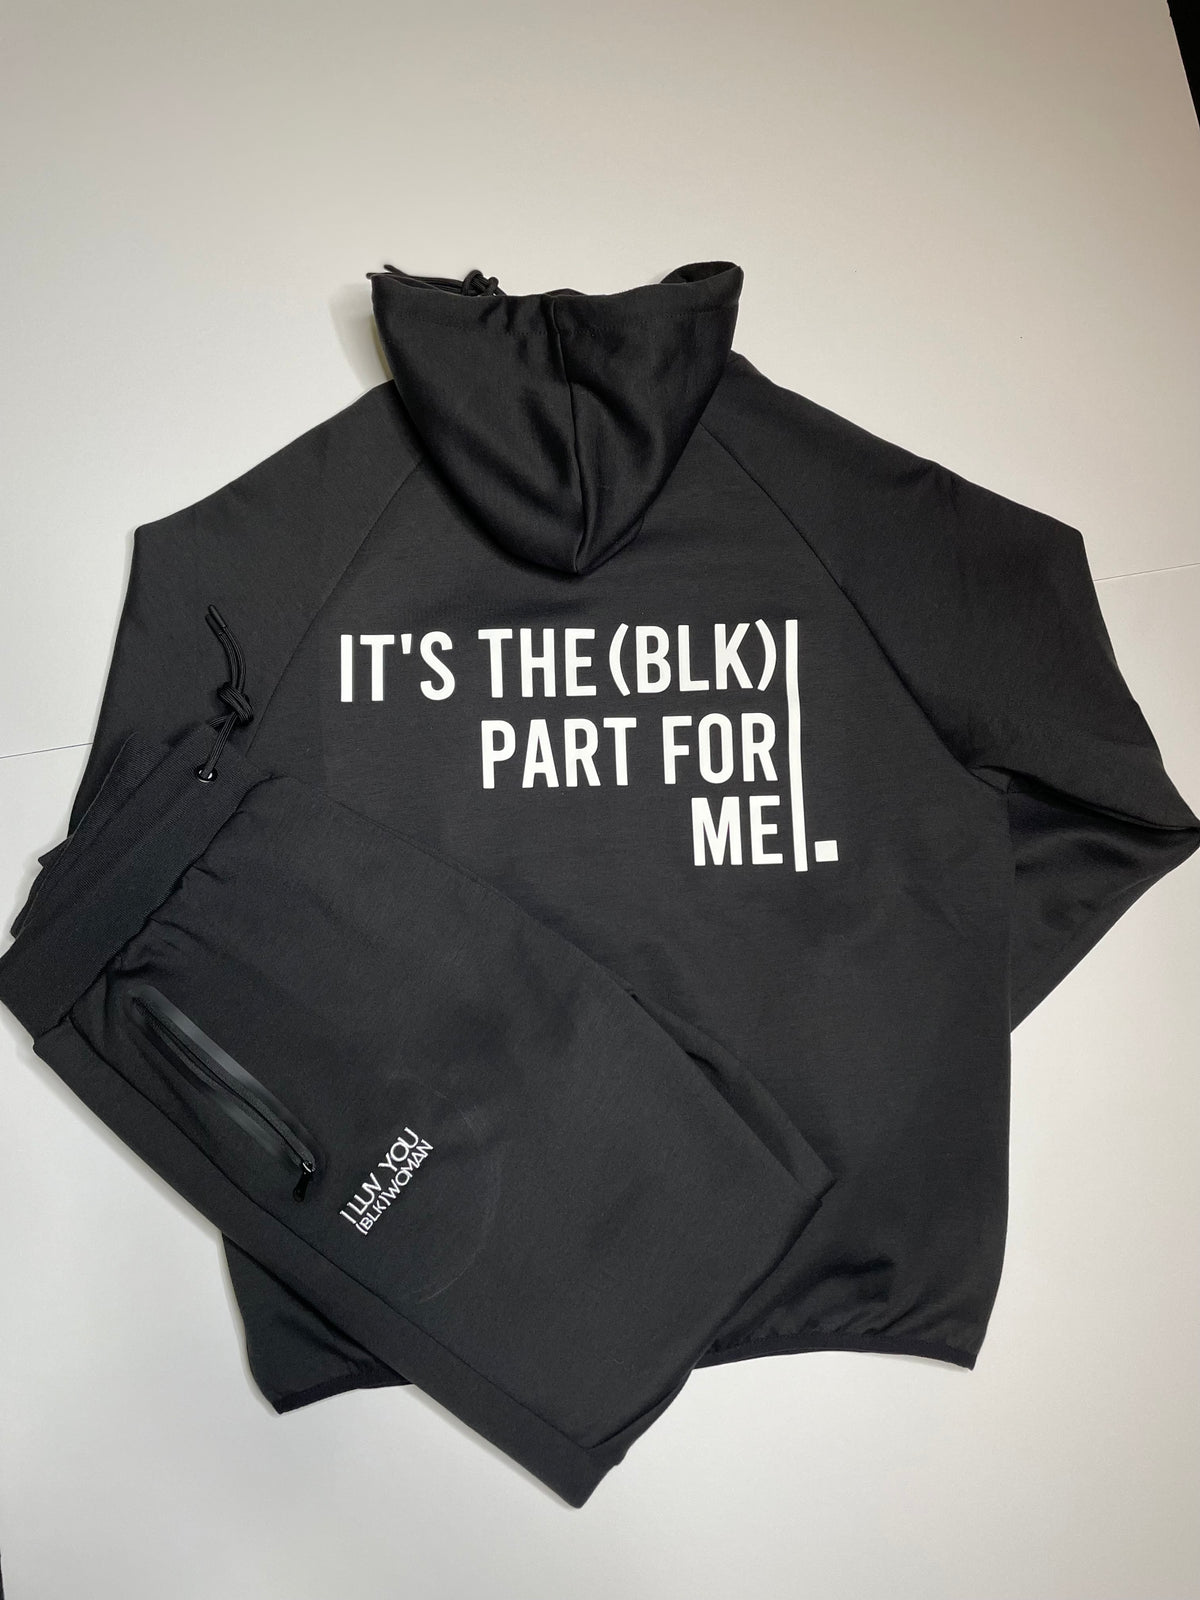 I LUV YOU (BLK) WOMAN Tracksuit